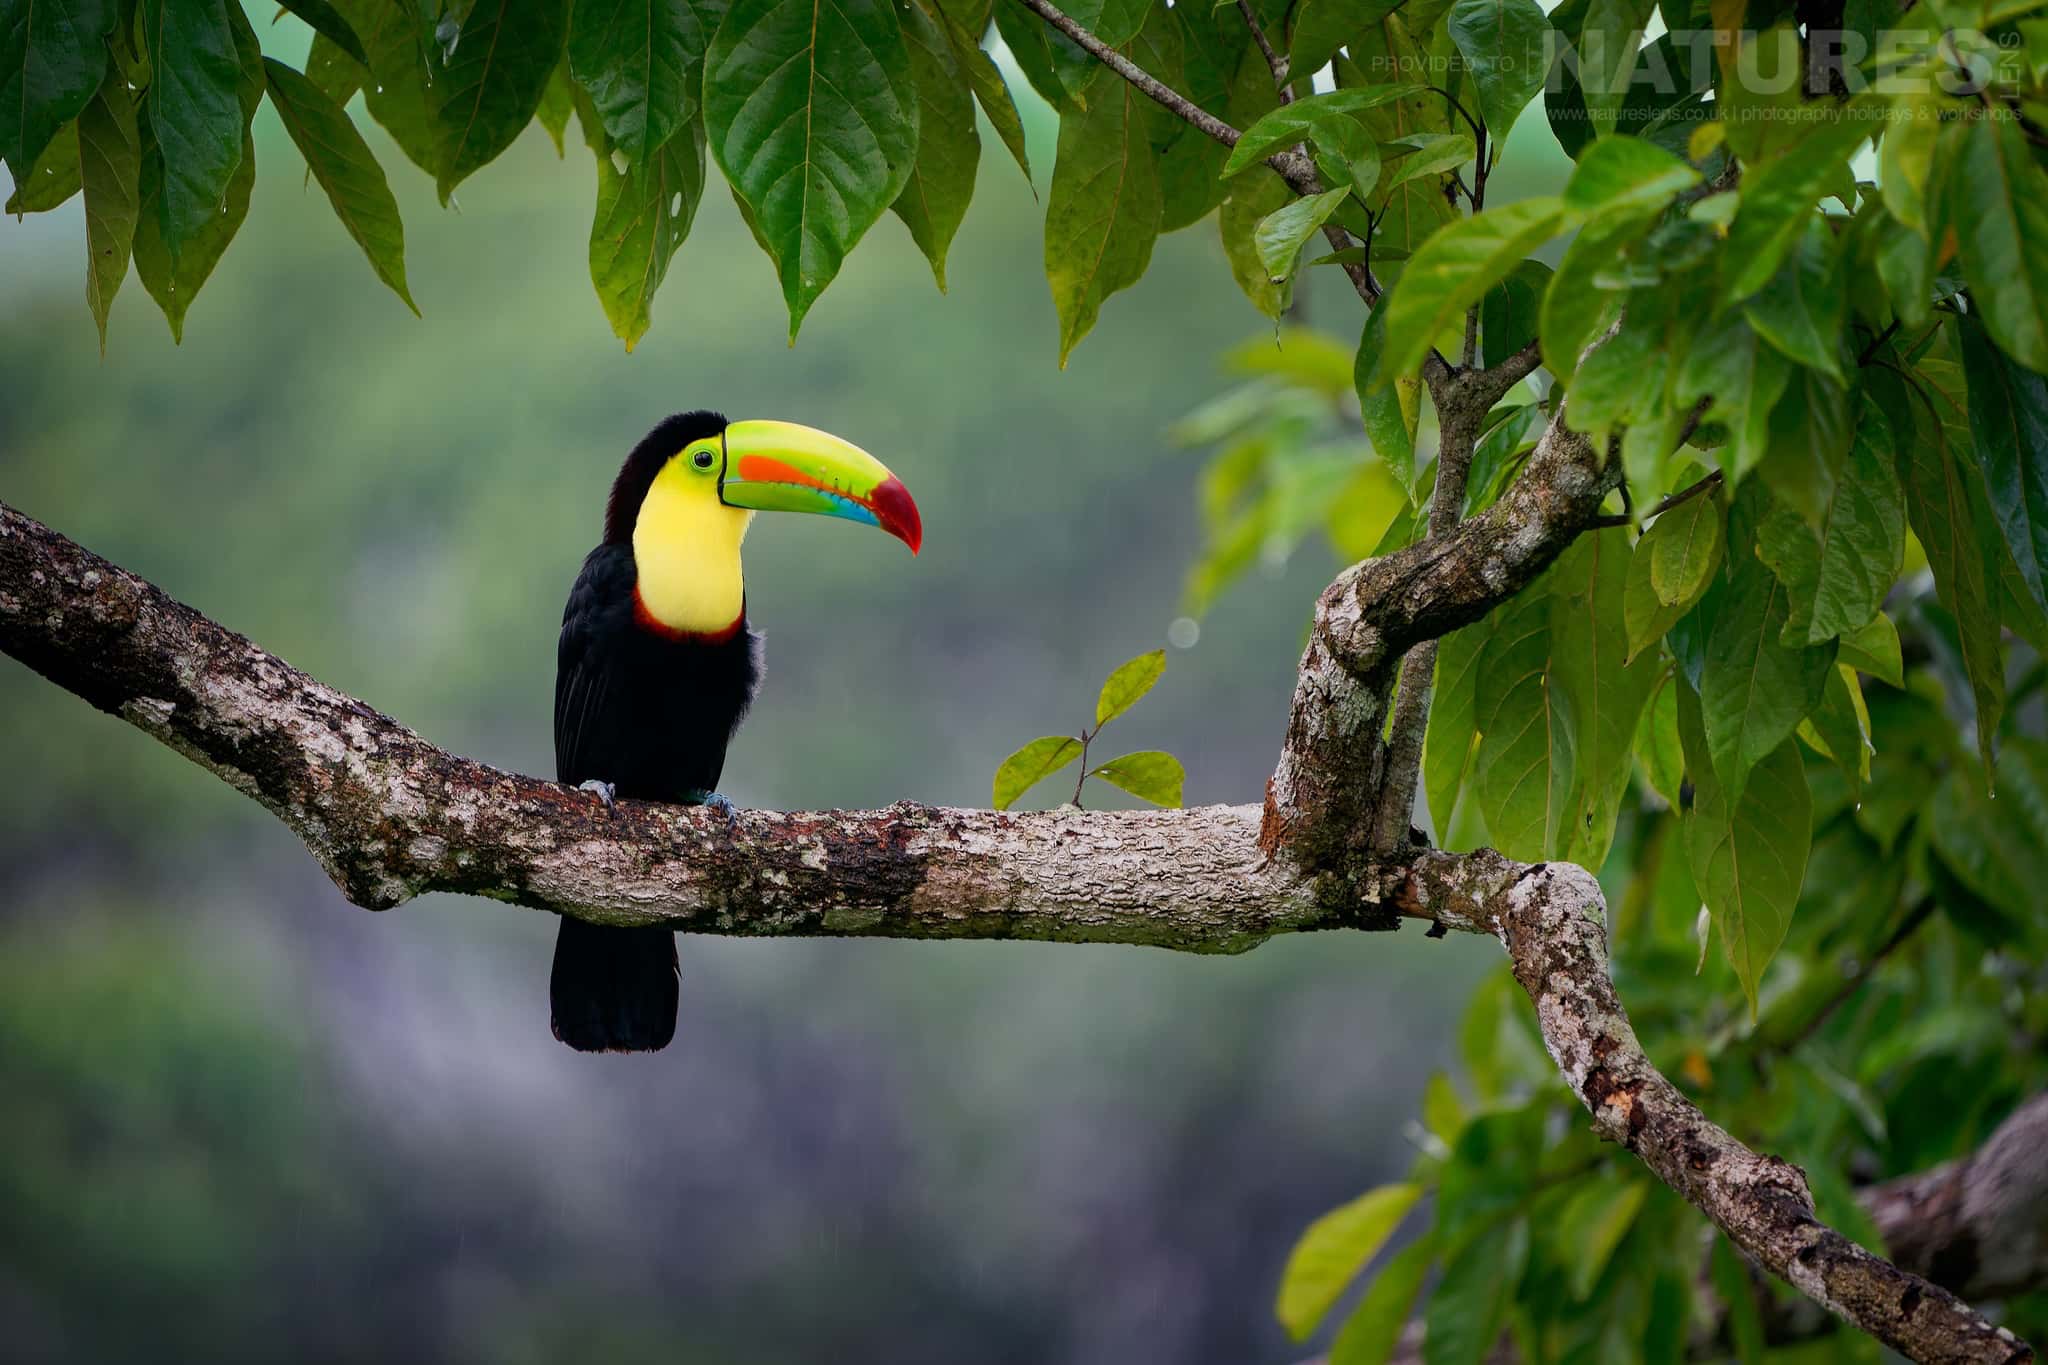 A Perched Keel Billed Toucan, One Of The Icons Of Costa Rica Which Can Be Photographed During The Natureslens Quetzals &Amp; Other Iconic Wildlife Of Costa Rica Photography Holiday